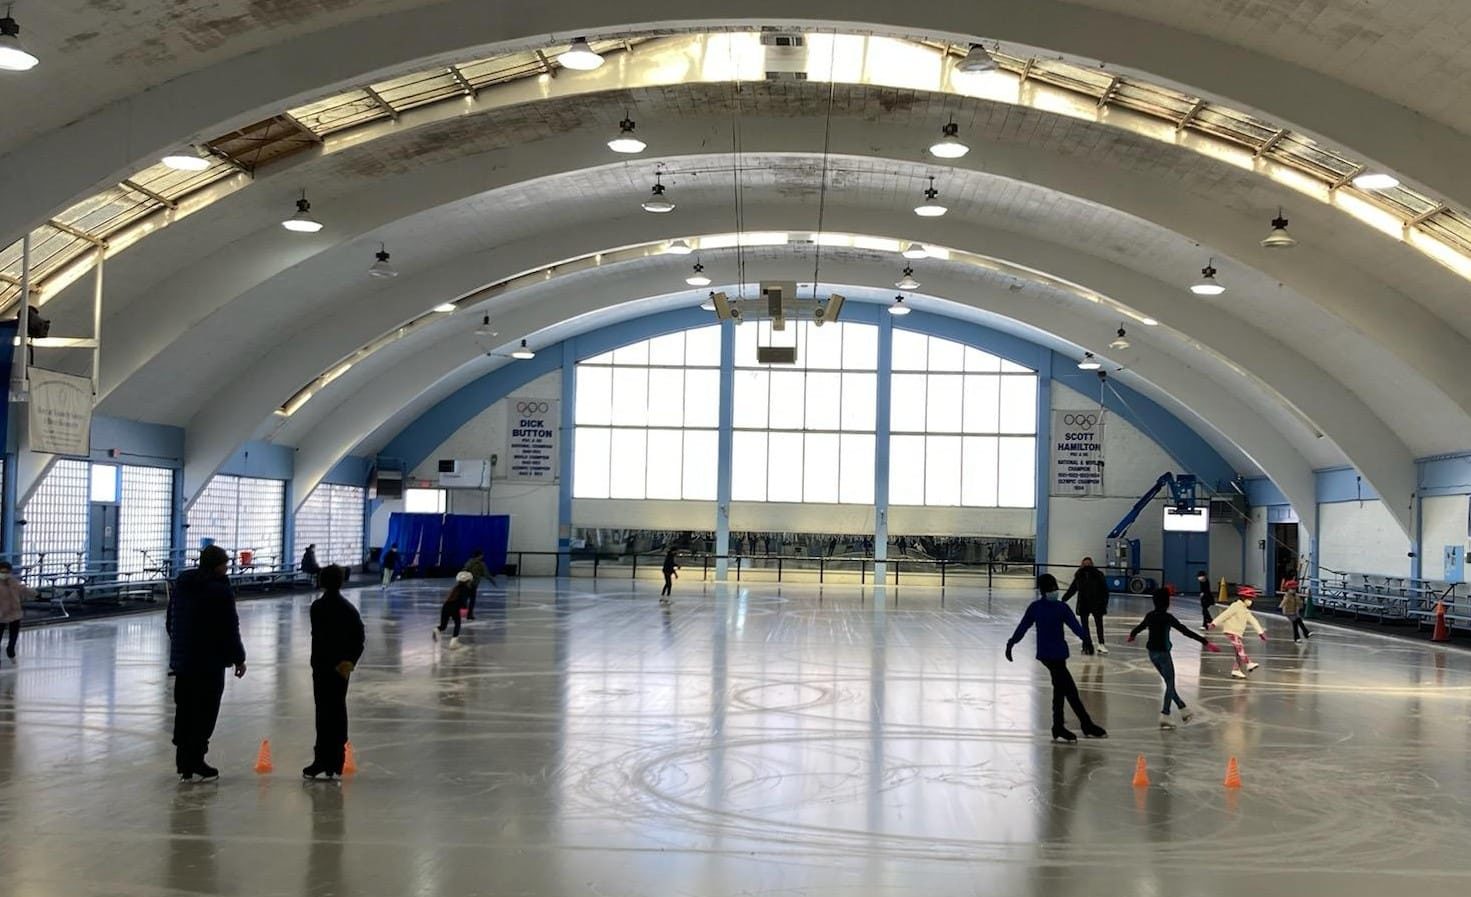 Large, open ice rink with a few skaters